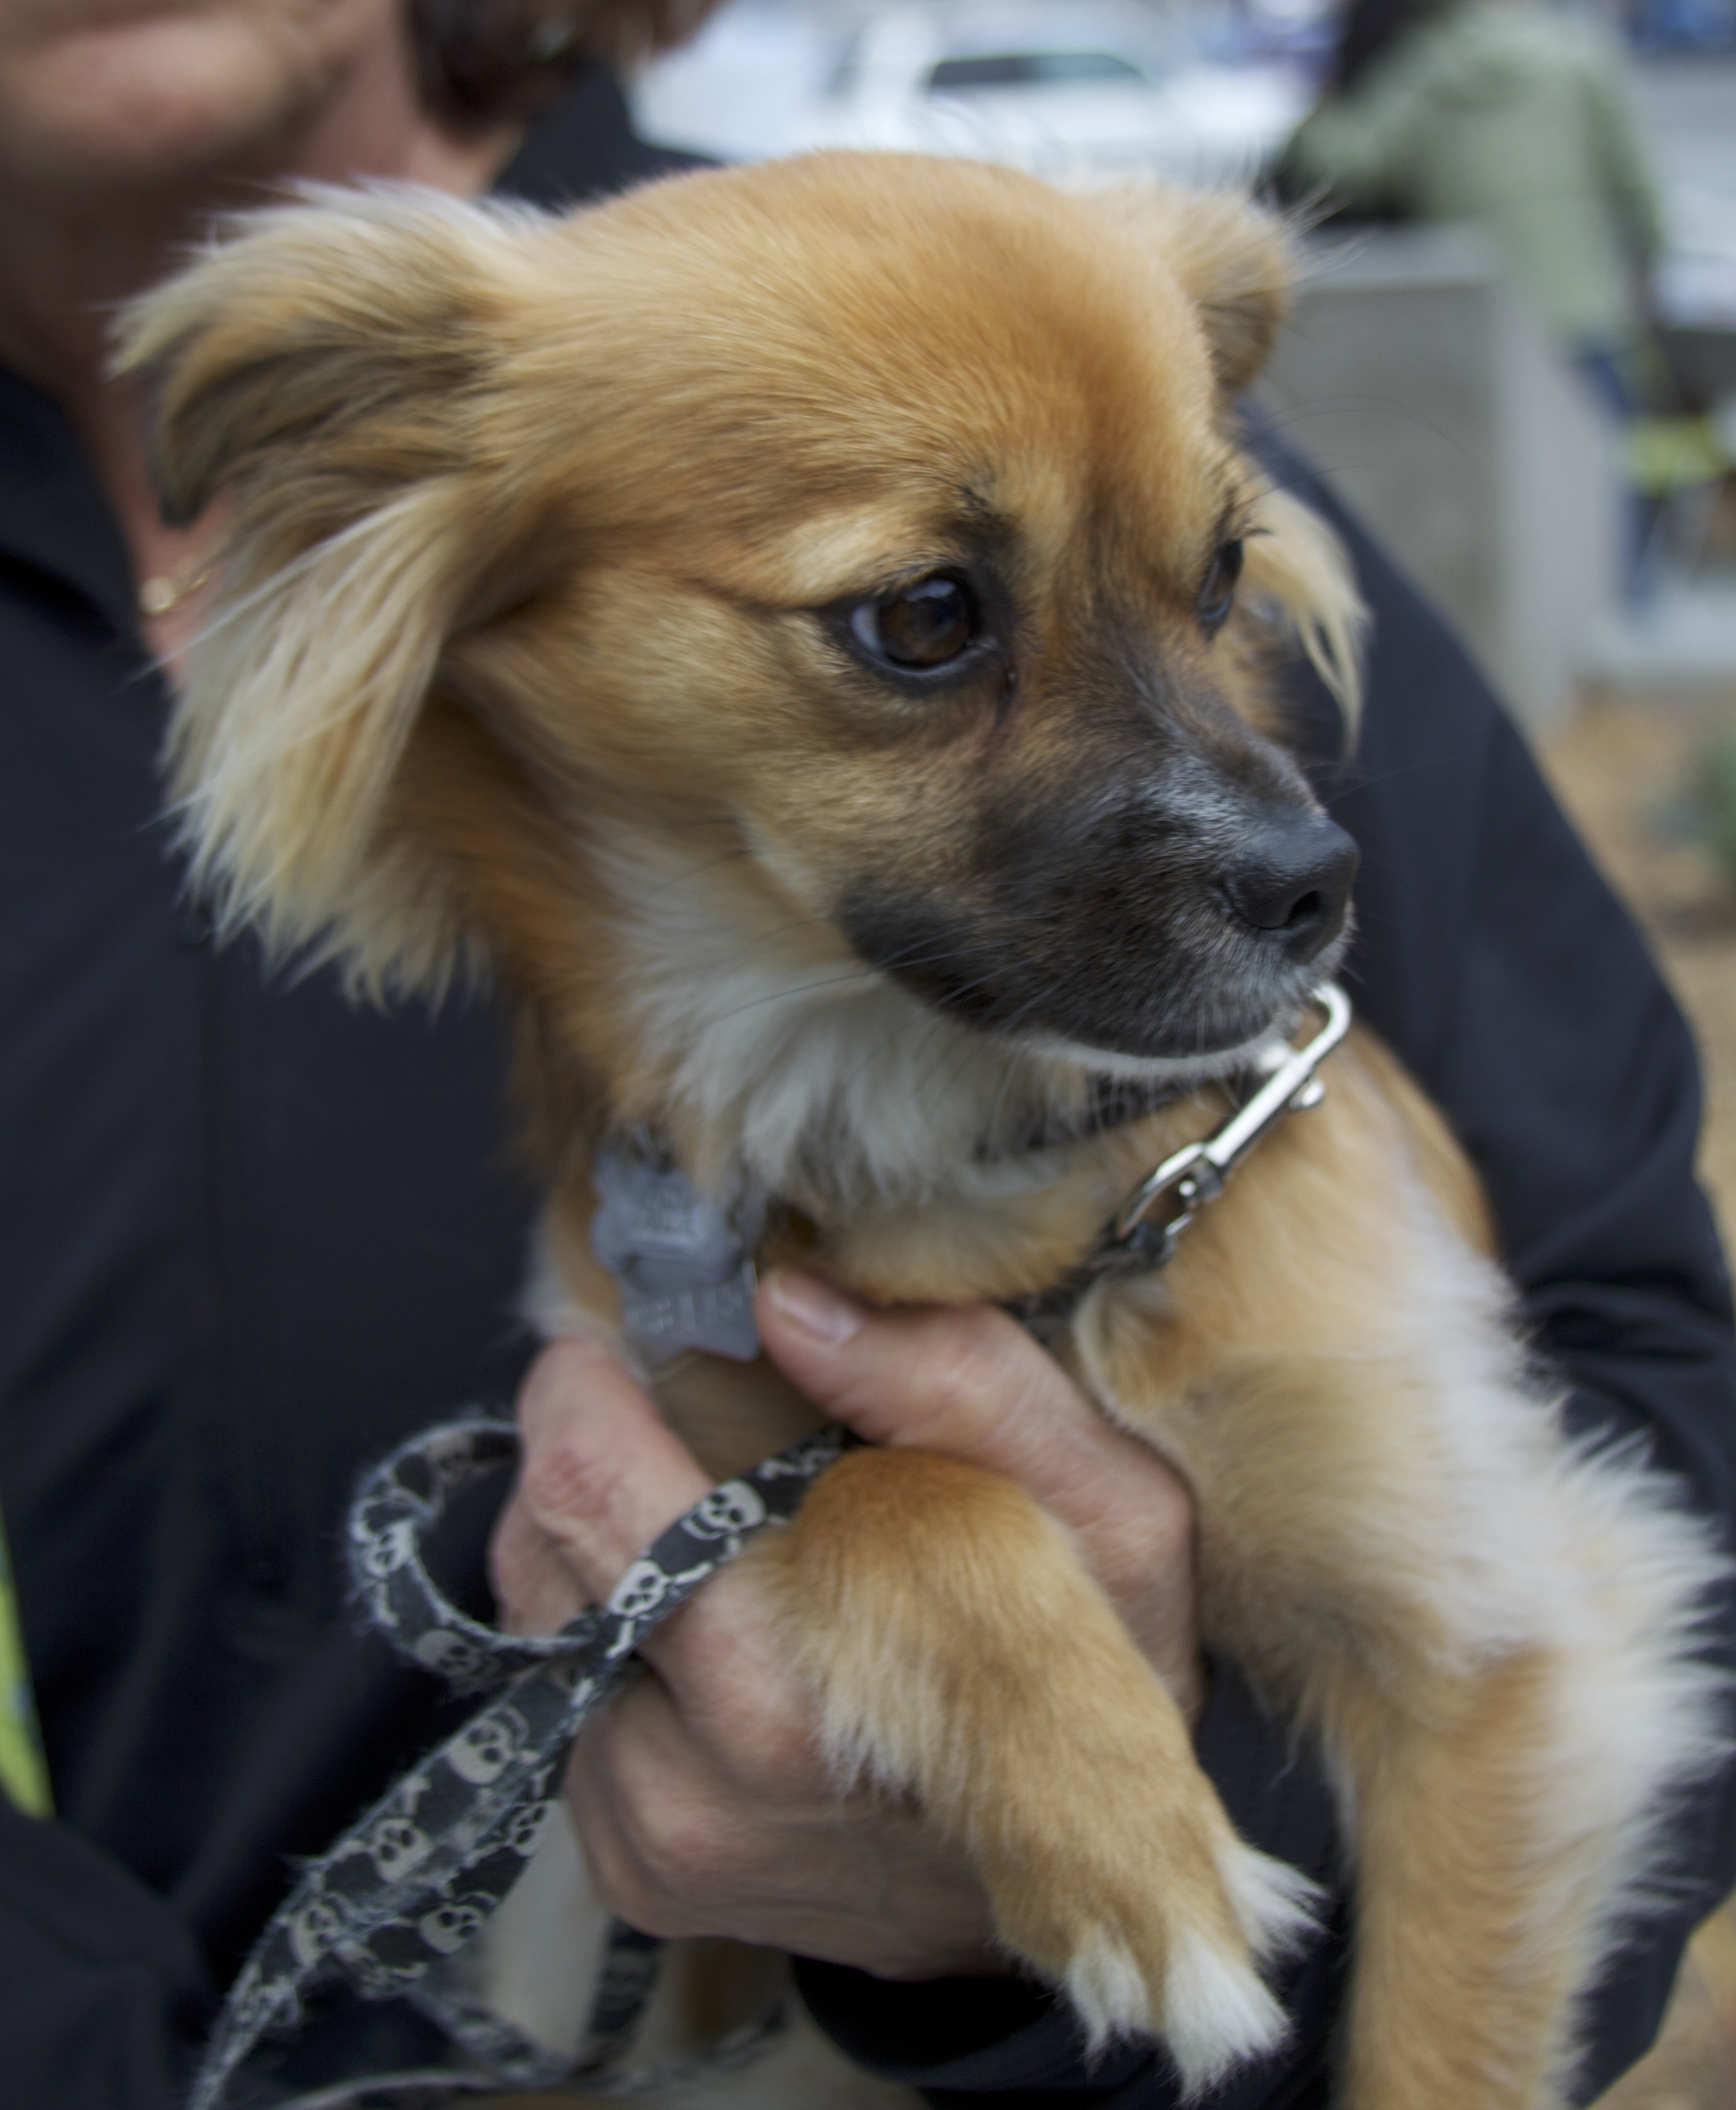 Tan-and-Whtie Pomeranian/Chihuahua/Dachshund Mix With Lots Of Ear Hair And Black Mask